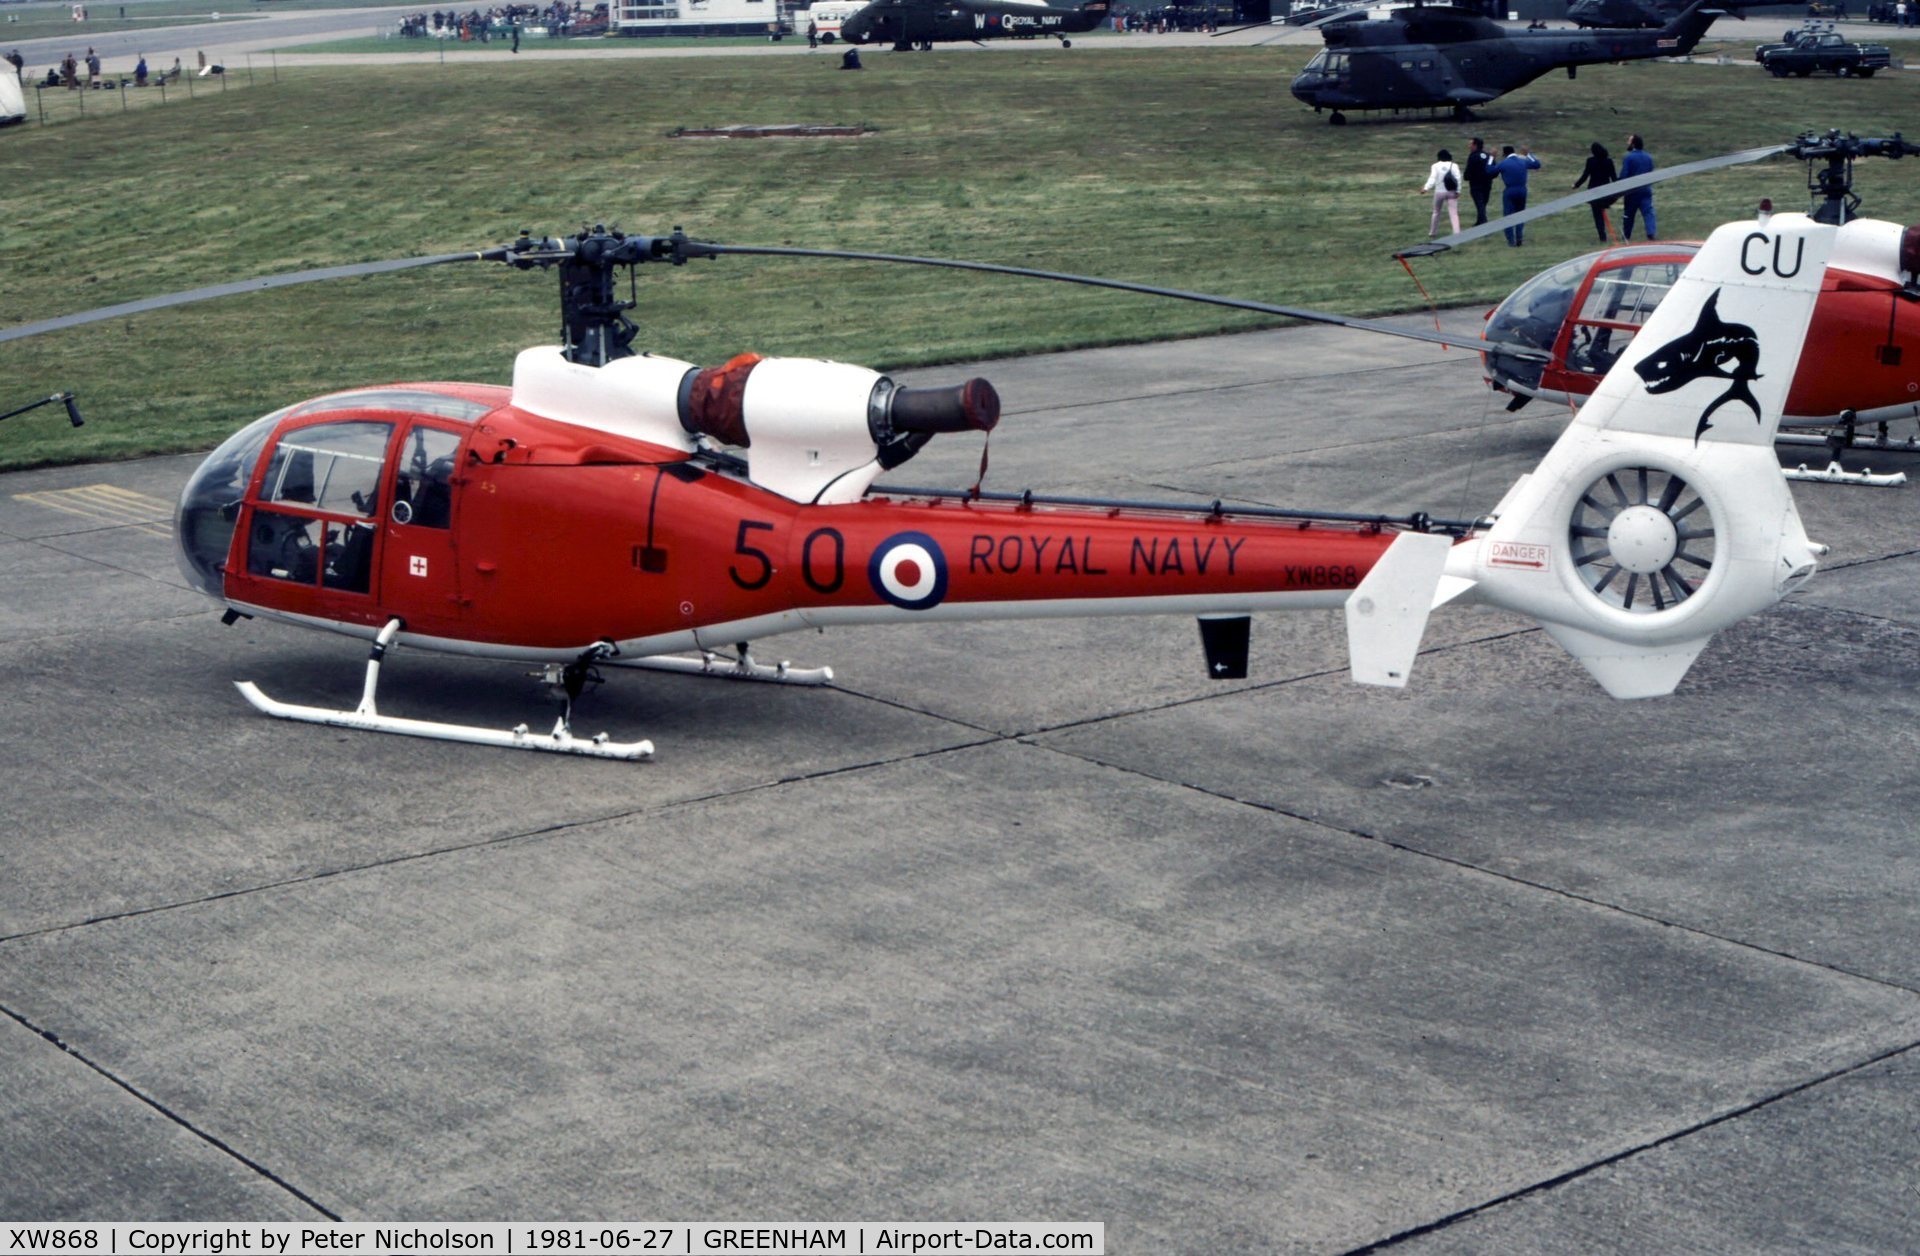 XW868, 1973 Westland SA-341C Gazelle HT2 C/N WA1130, Another of The Sharks aerobatic display team flown by 705 Squadron at the 1981 Intnl Air Tattoo at RAF Greenham Common.